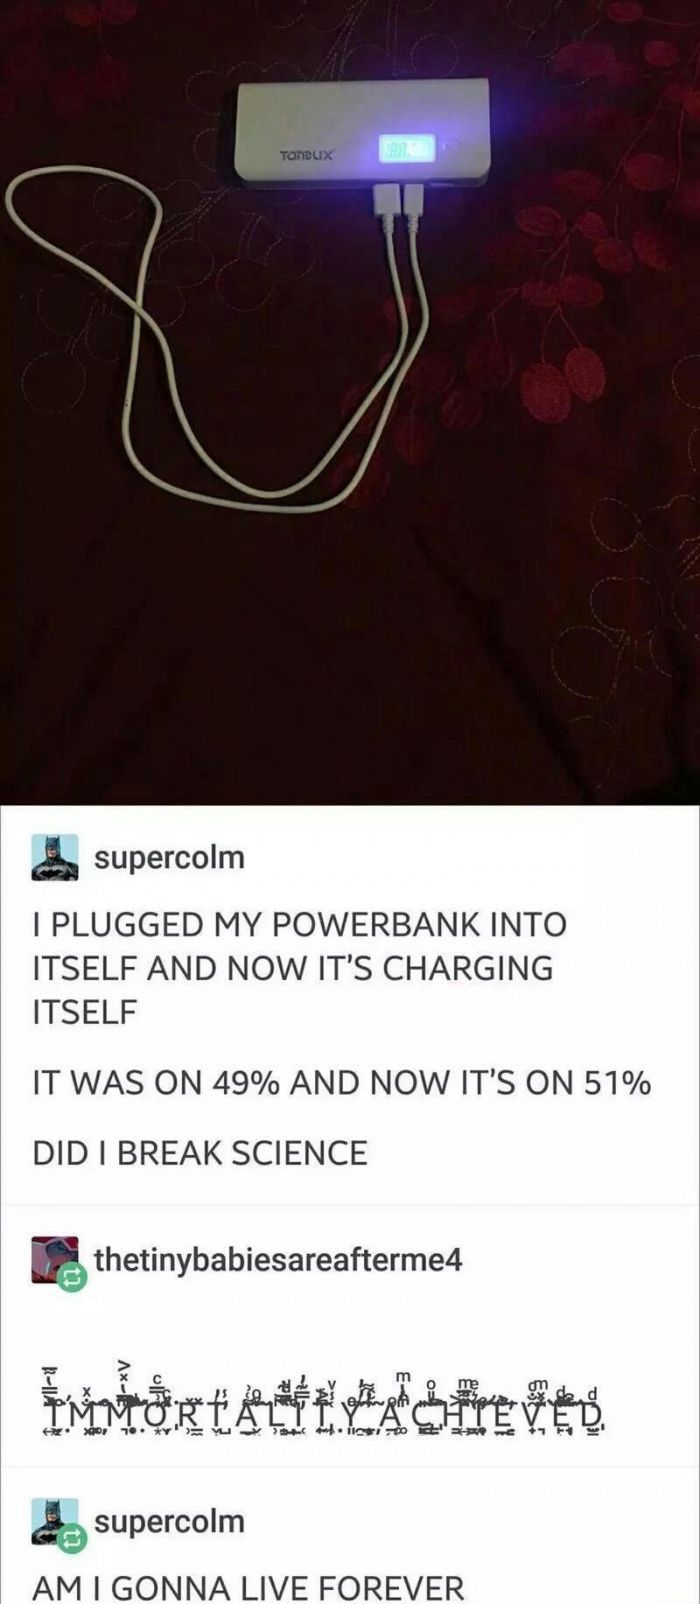 It started charging itself funny pics, funny gifs, funny videos, funny memes, funn